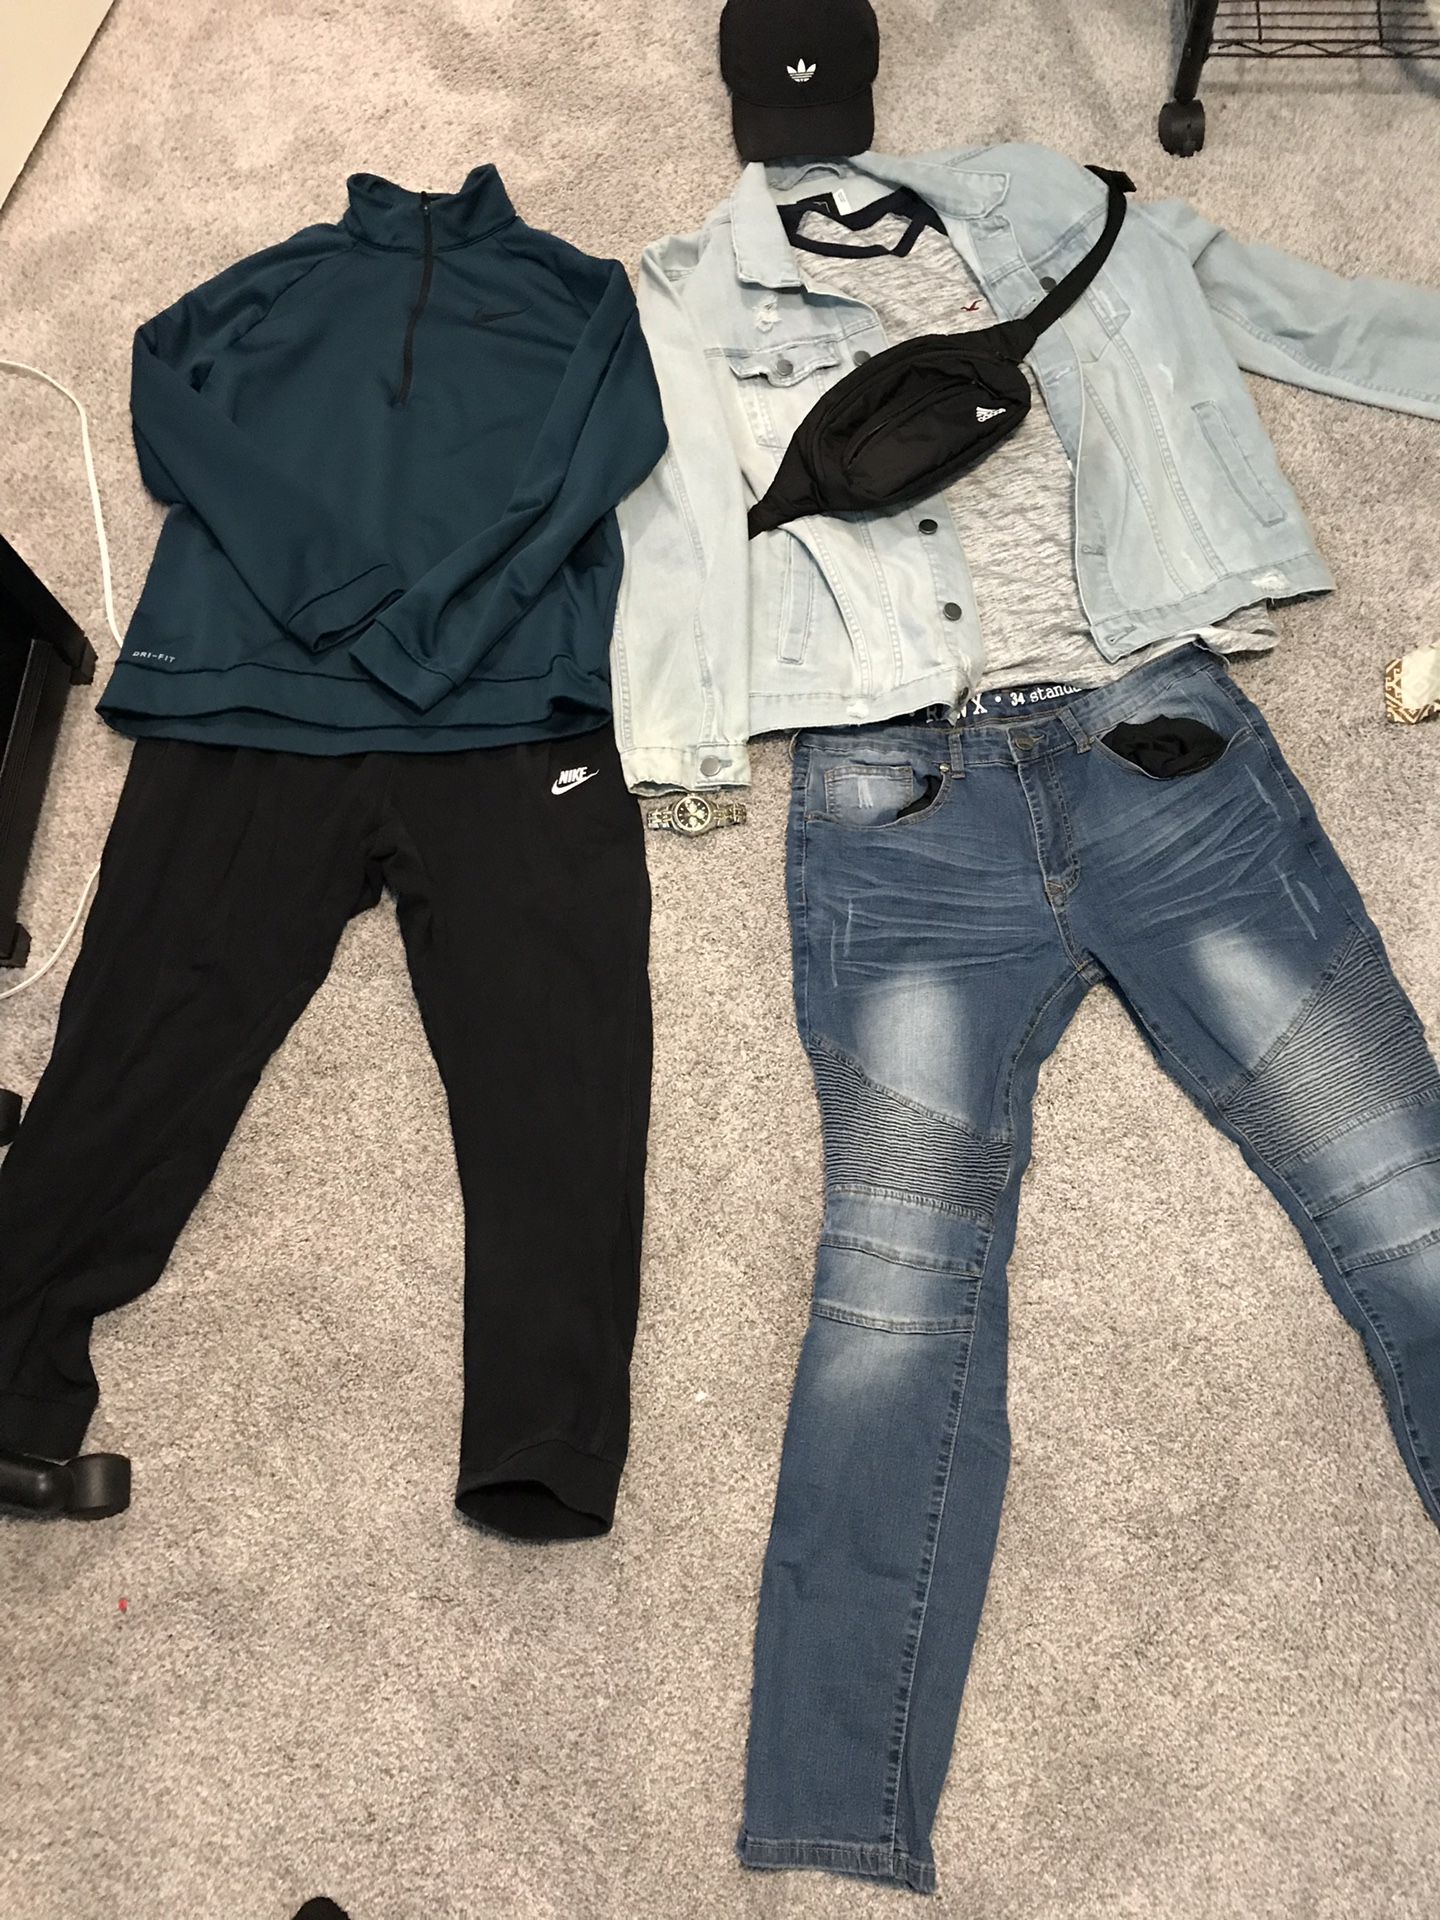 One outfit on the right